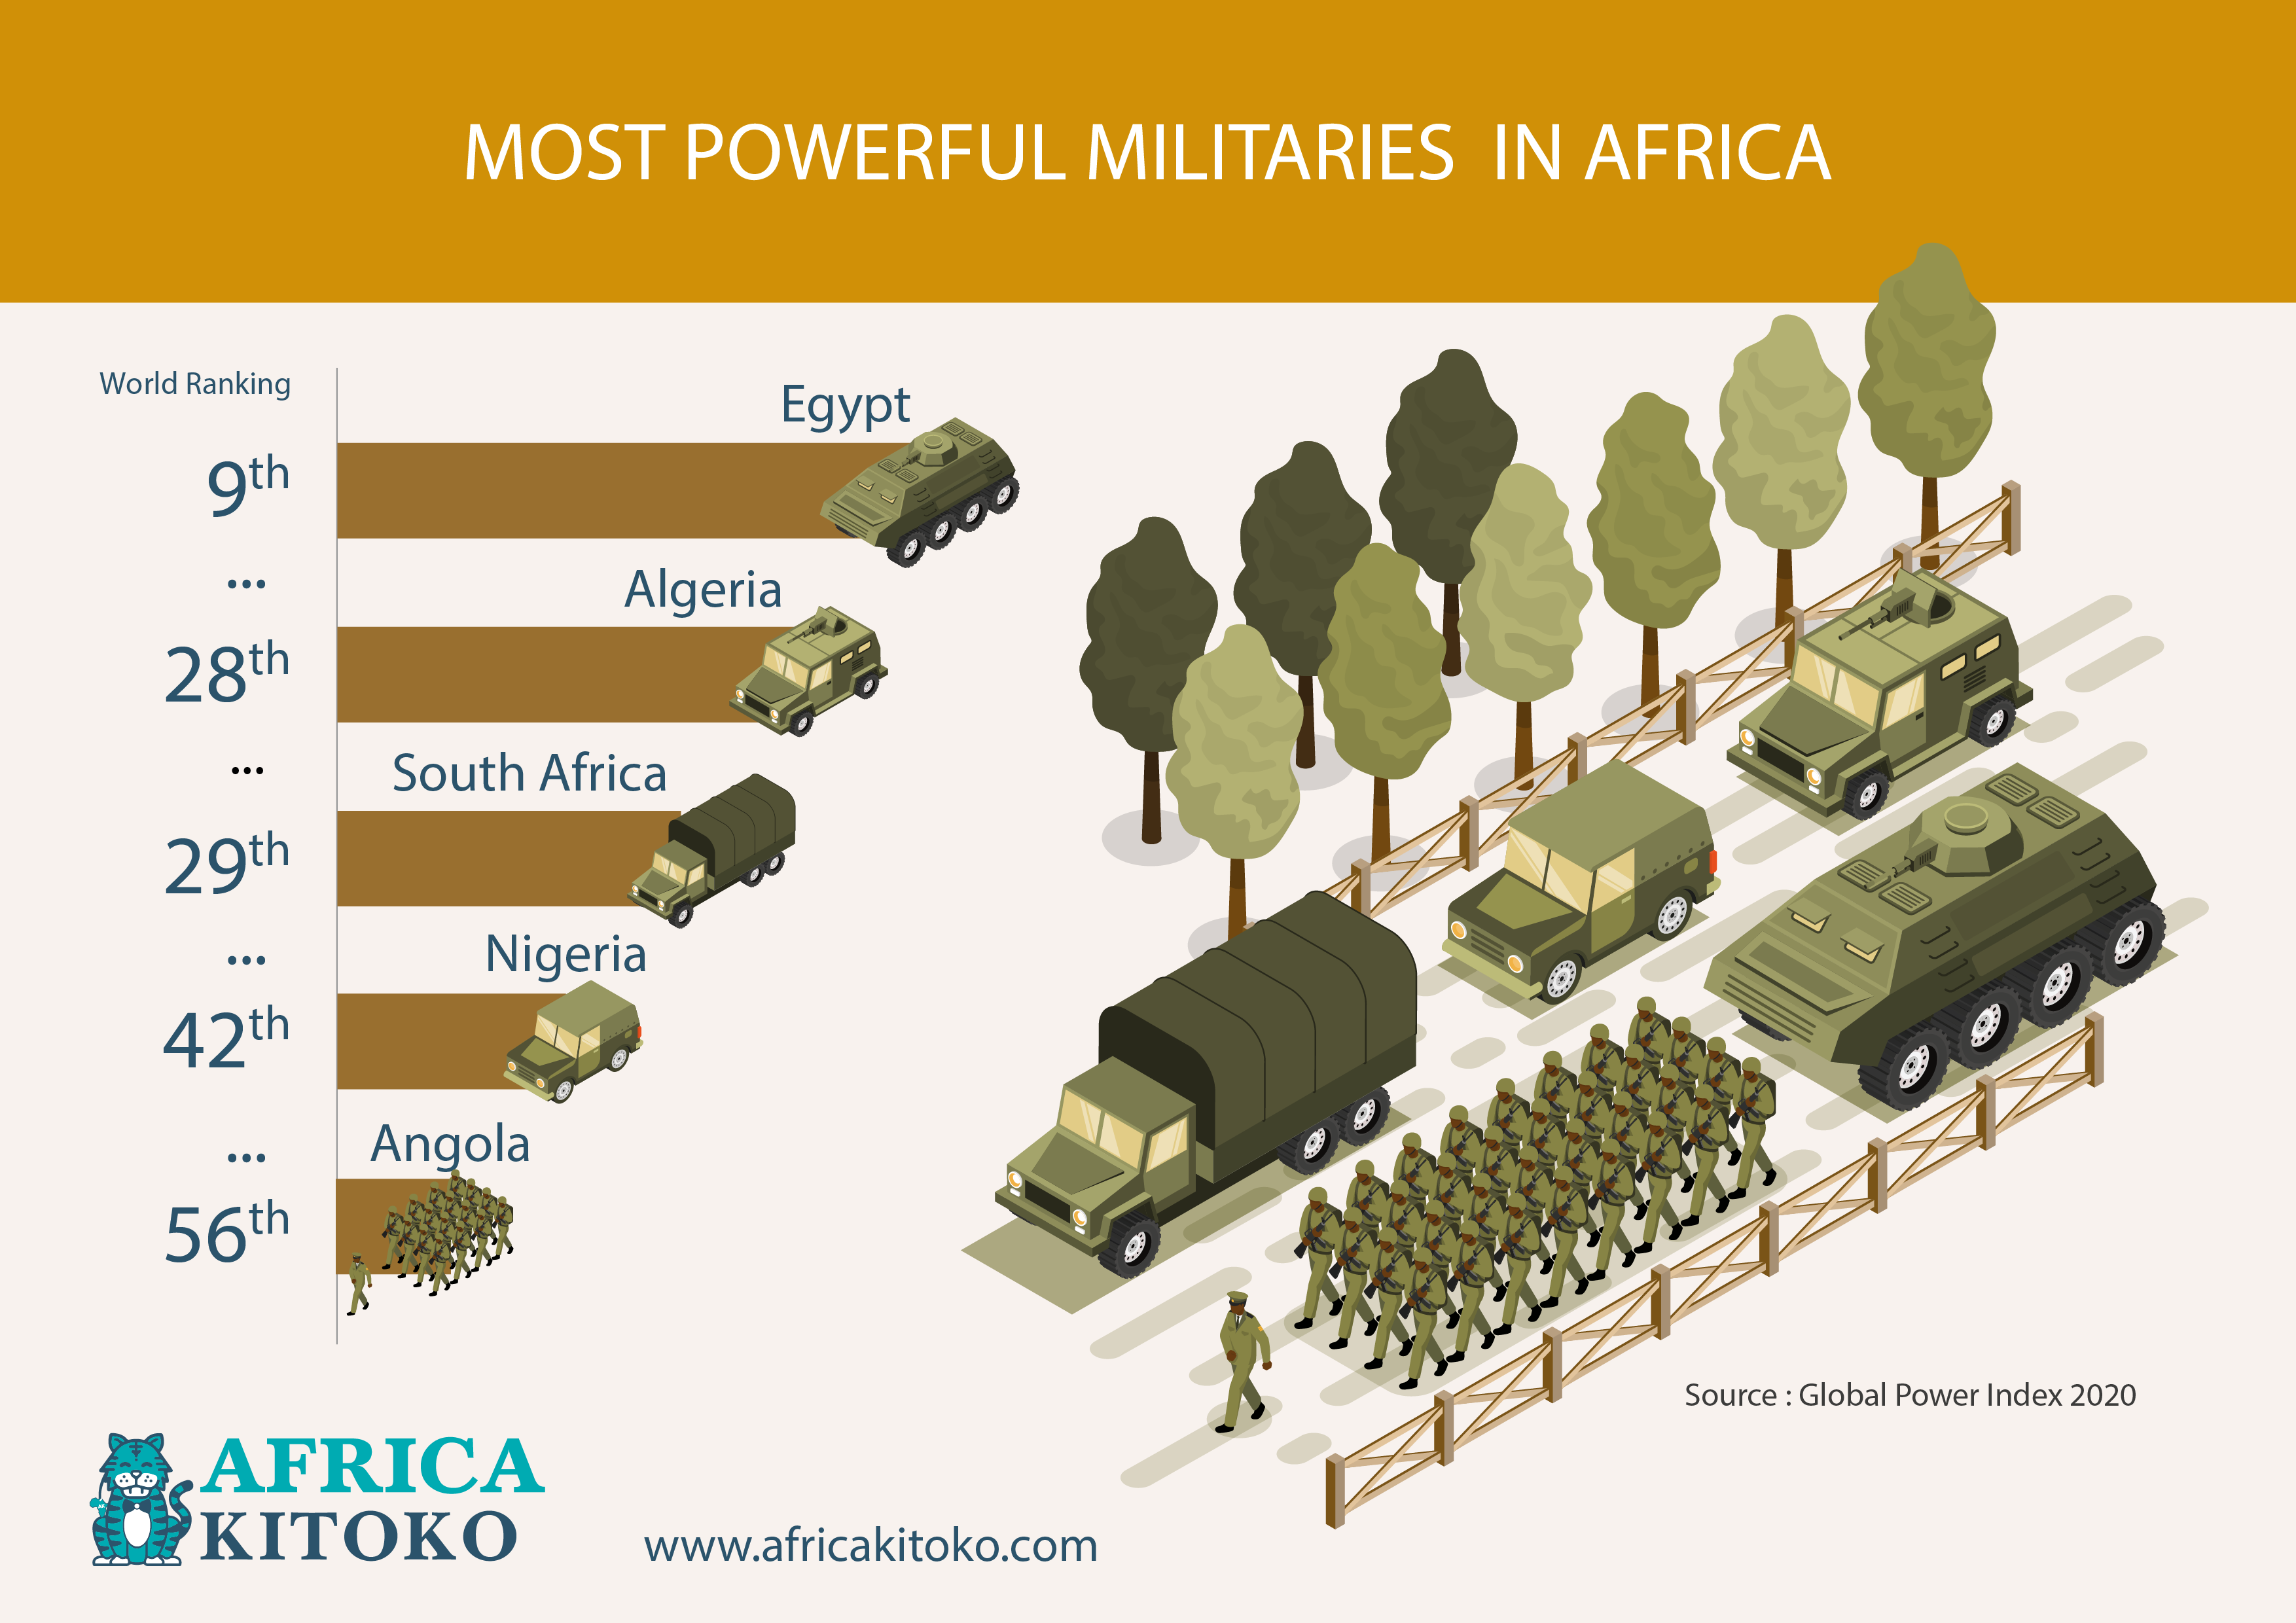 INFOGRAPHIC: Africa's Most Powerful Militaries, by Techloy, Techloy, Business and technology news & data in emerging markets